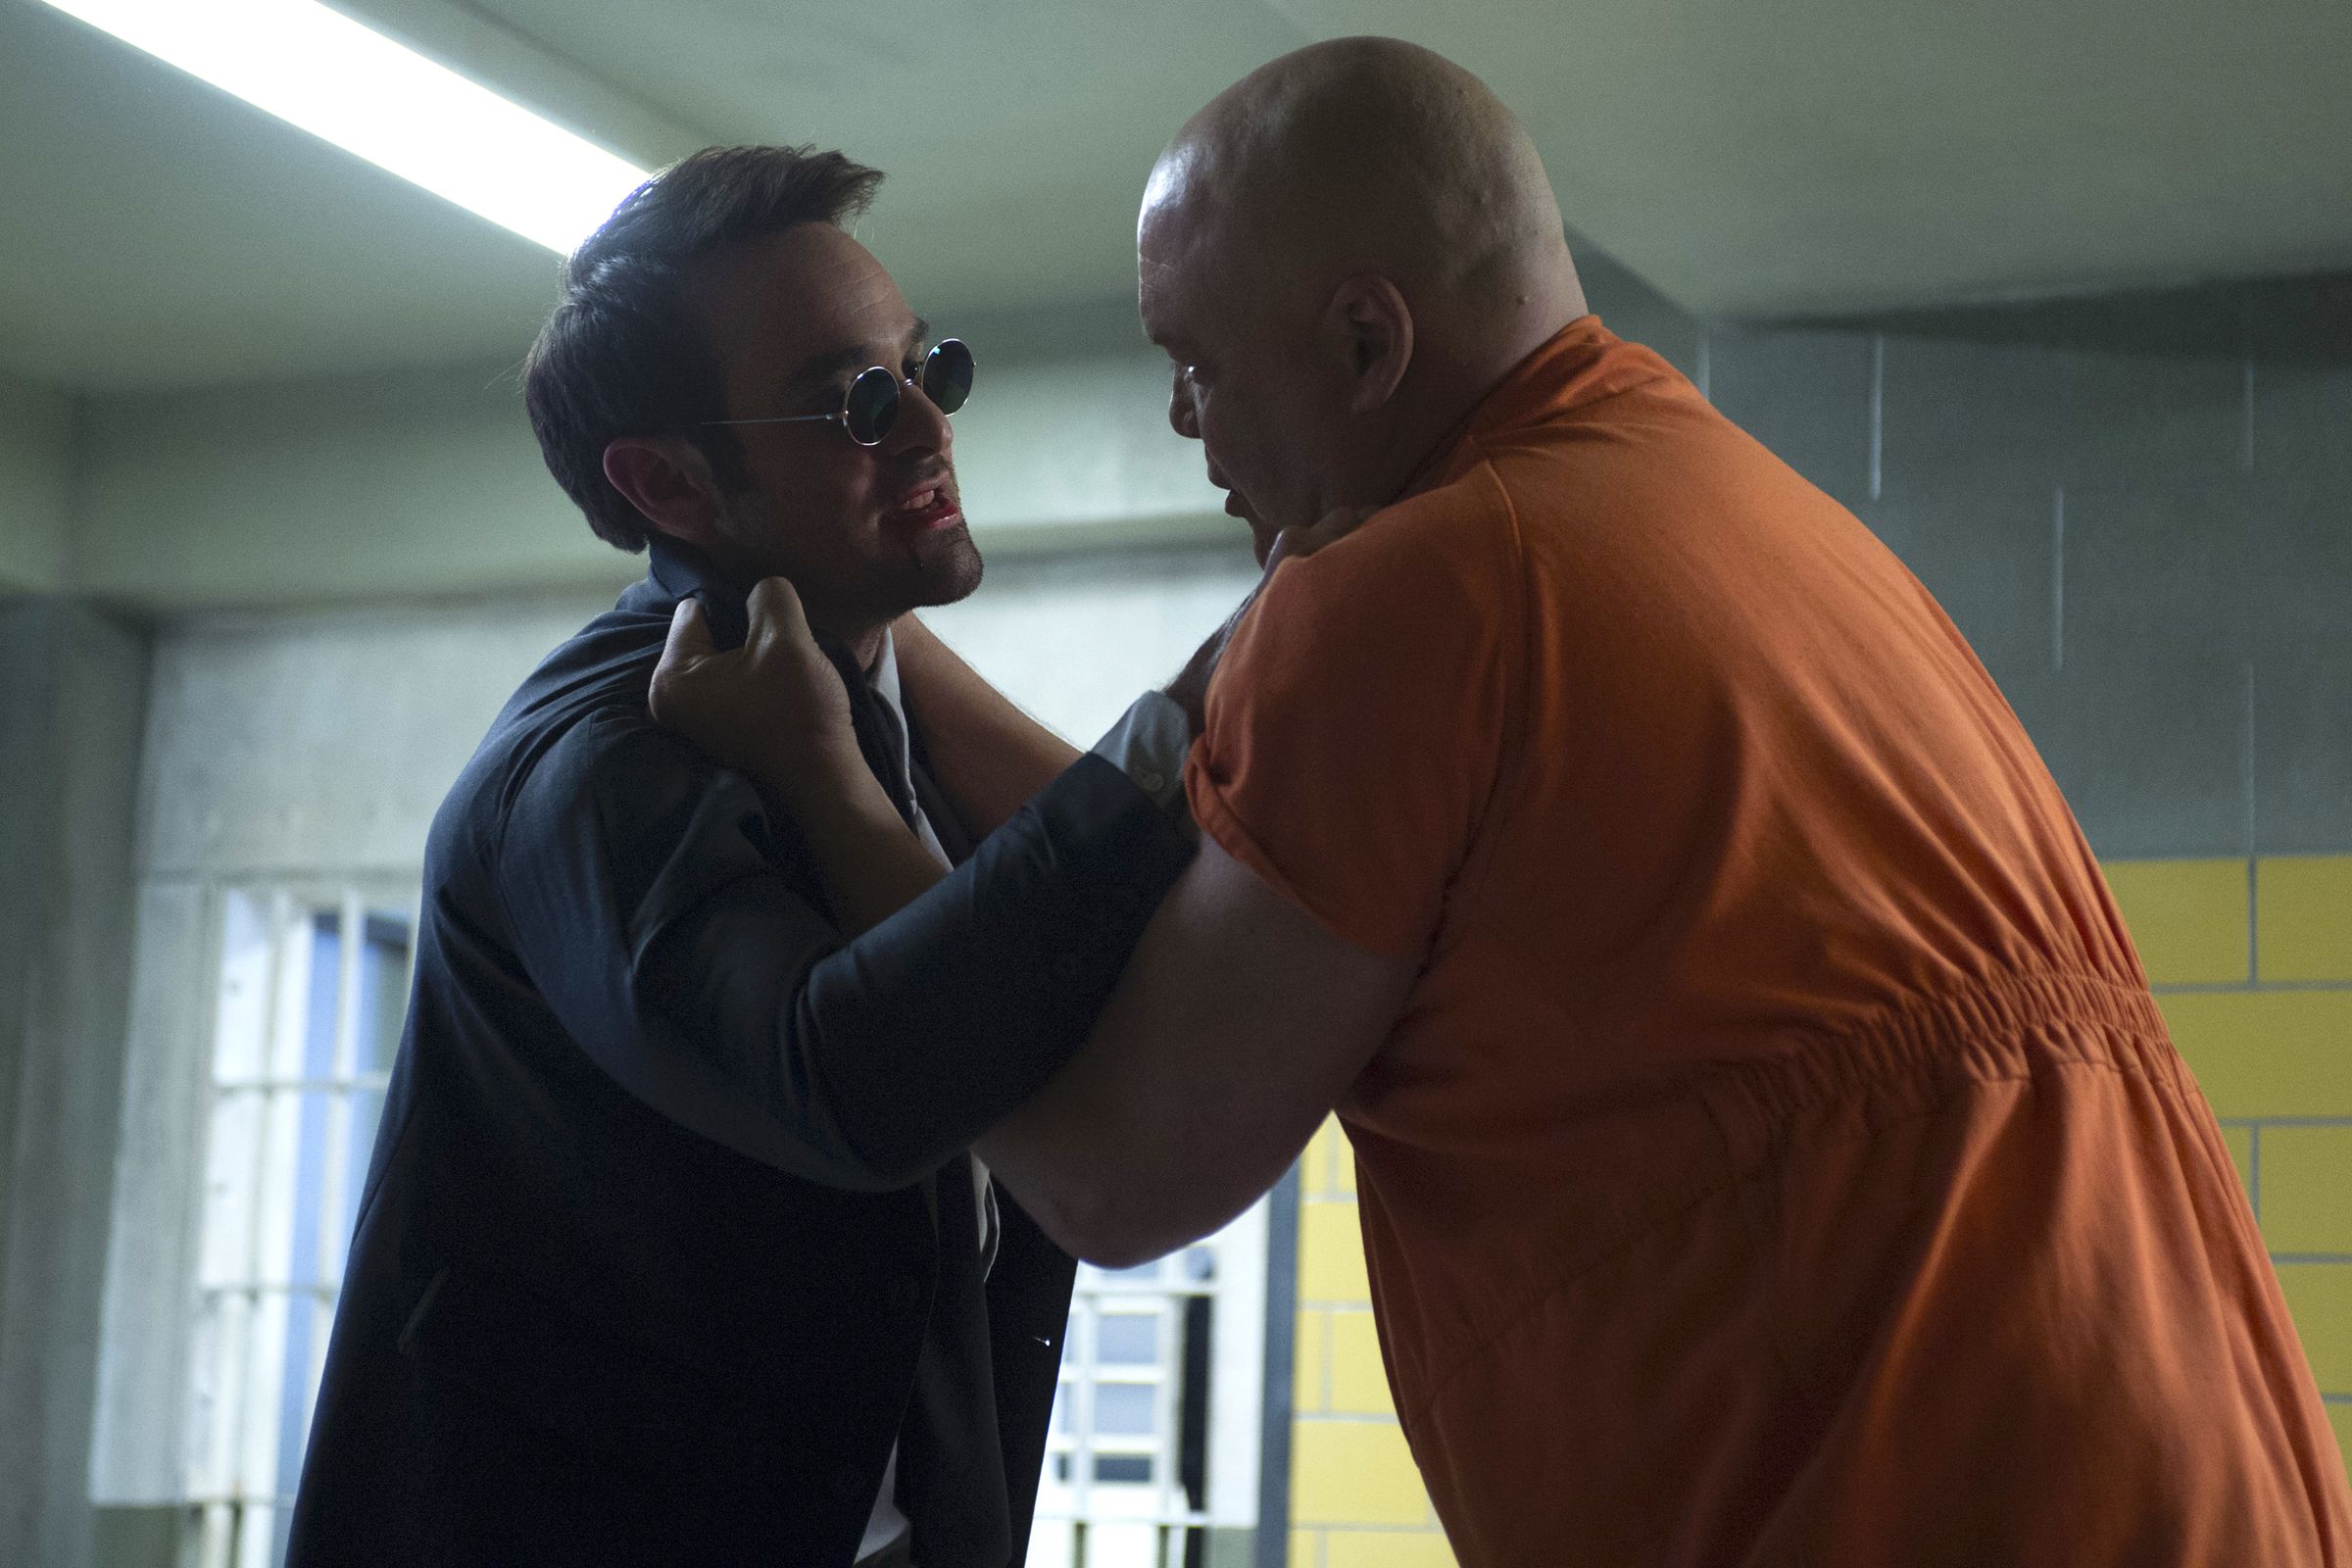 Charlie Cox as Matt Murdock and Vincent D’Onofrio as Wilson Fisk in Marvel’s Daredevil.